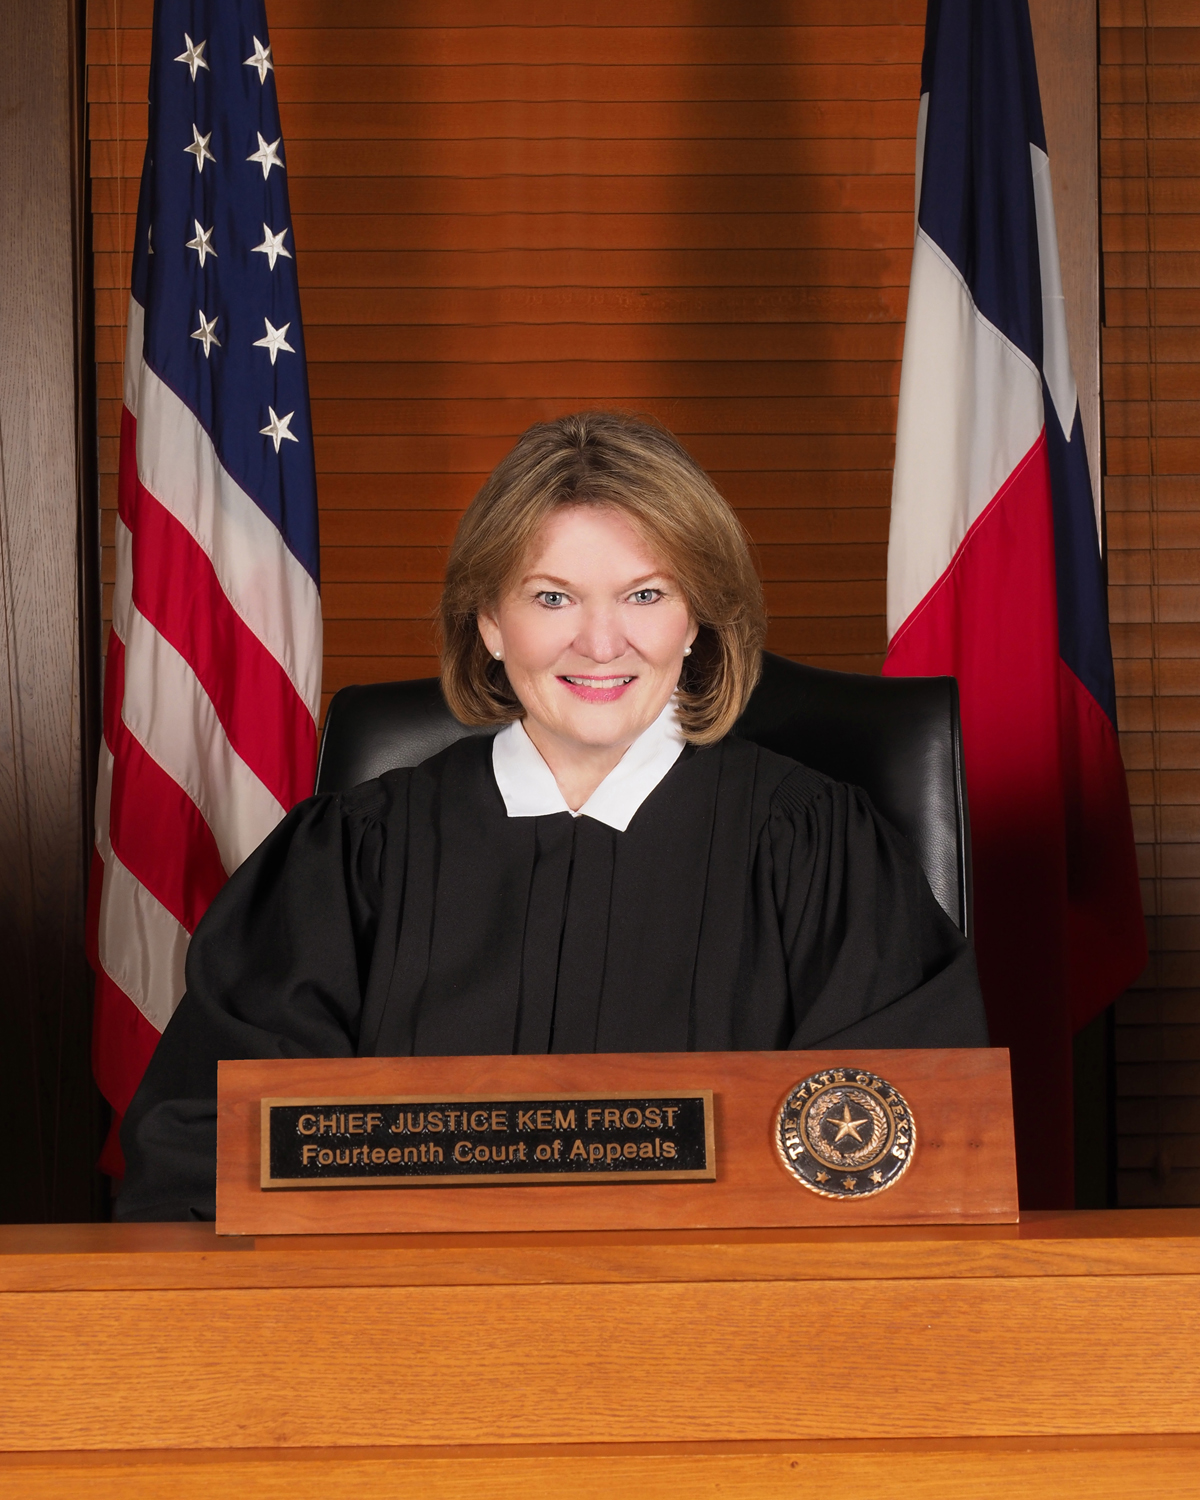 Chief Justice Kem Frost